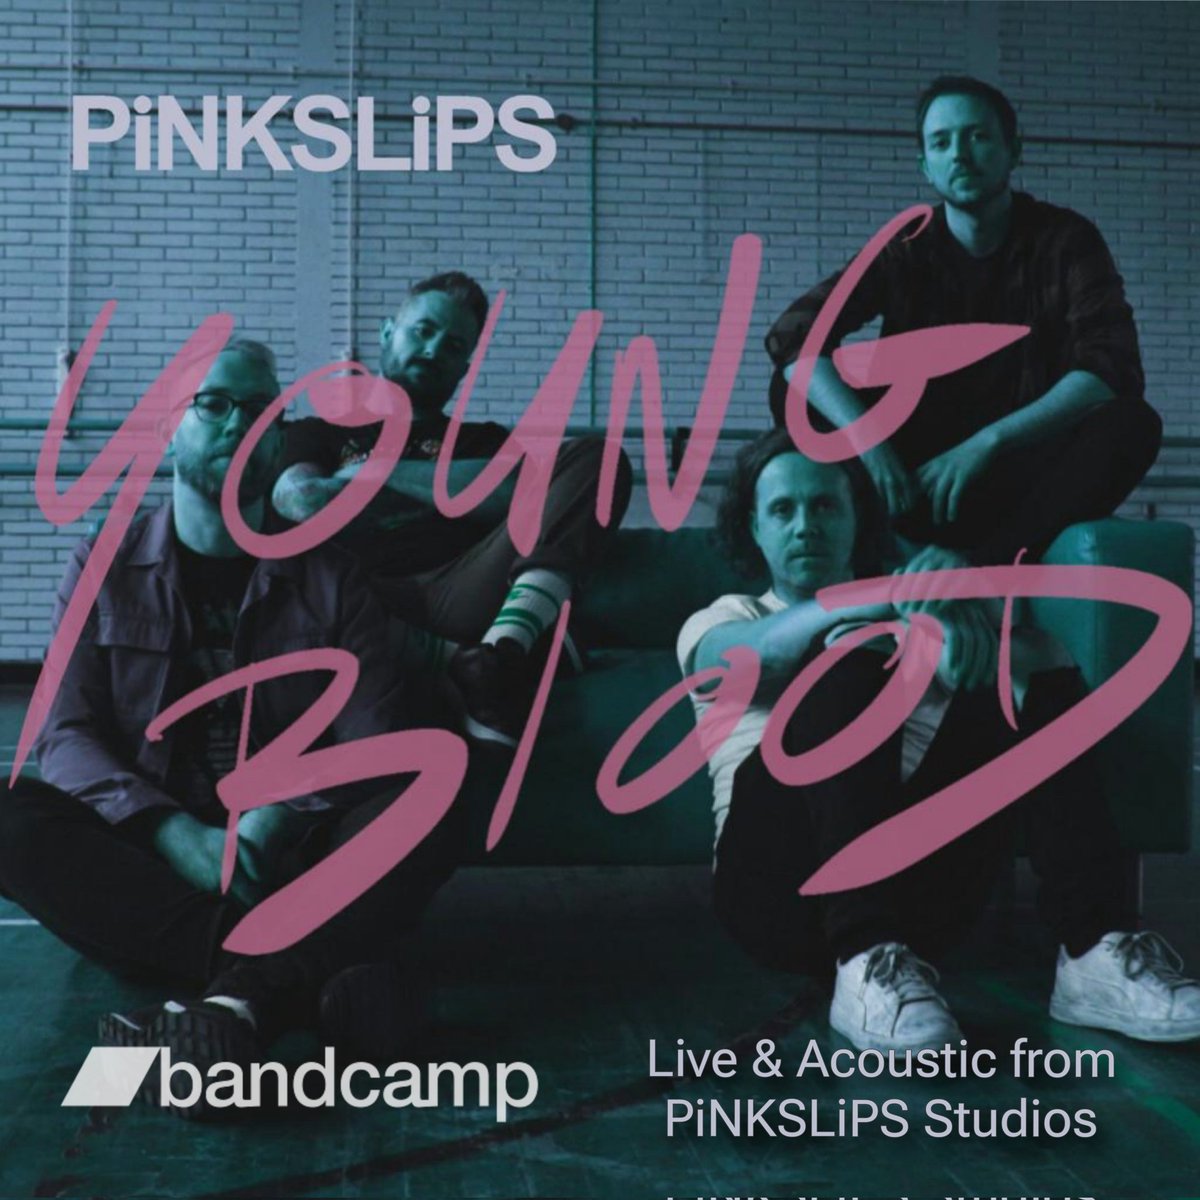 Hola Muchachos!

To promote our upcoming @CrescentArts Stripped Down show, and in honour of the 40th @Bandcamp Friday, we've released a live acoustic version of our debut single 'Young Blood'.

pinkslipsni.bandcamp.com/track/young-bl…